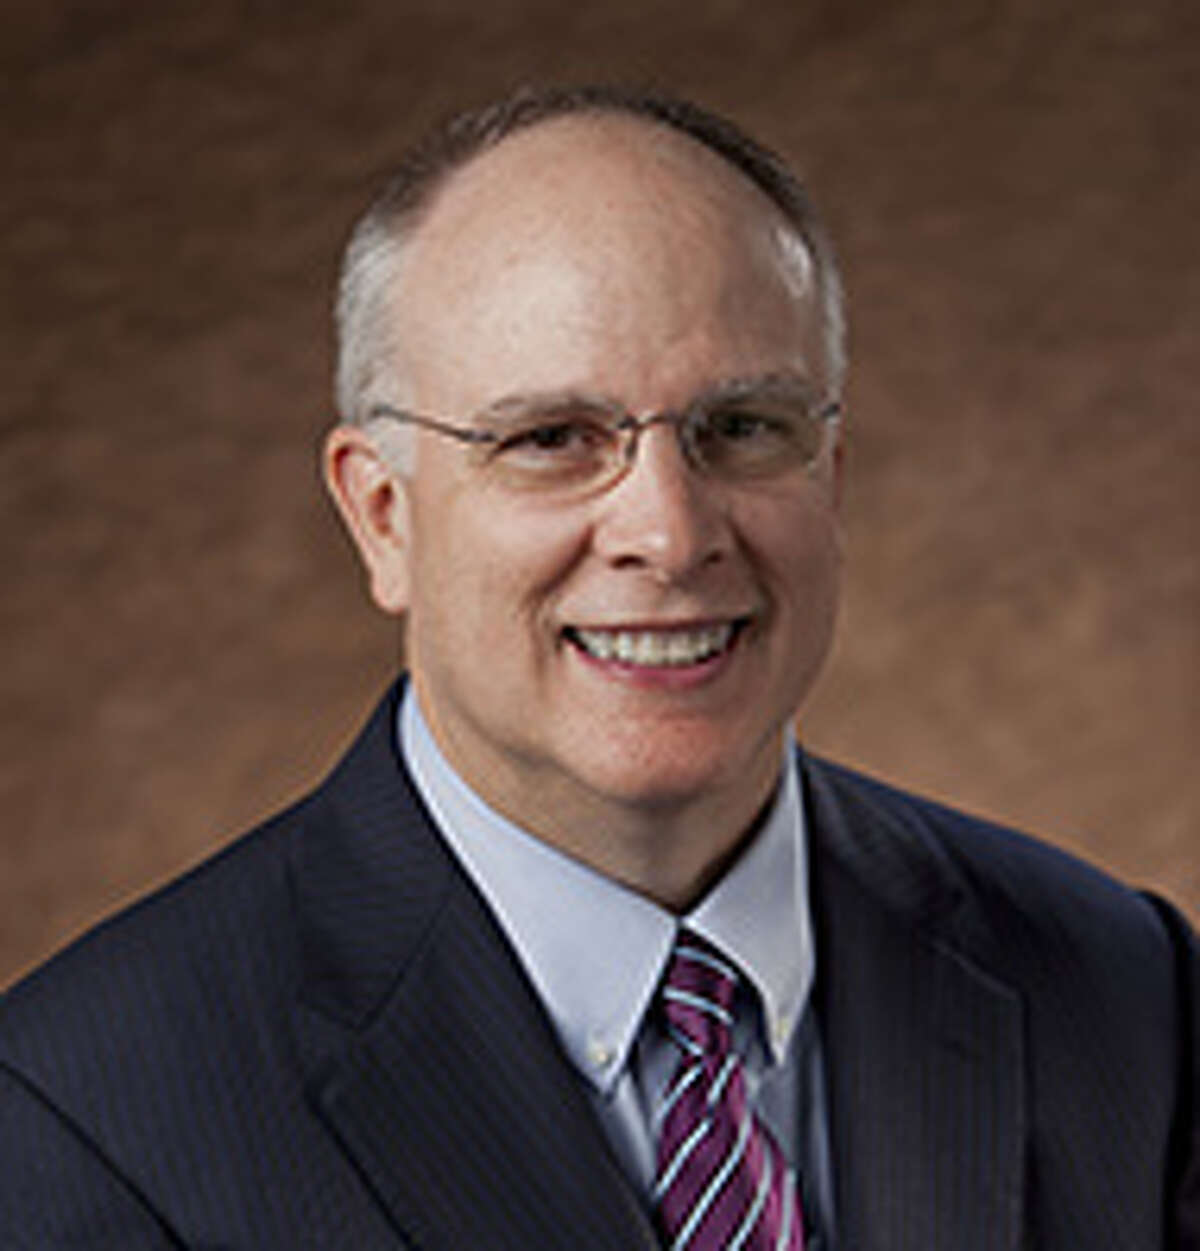 David Stover is CEO of Noble Energy.